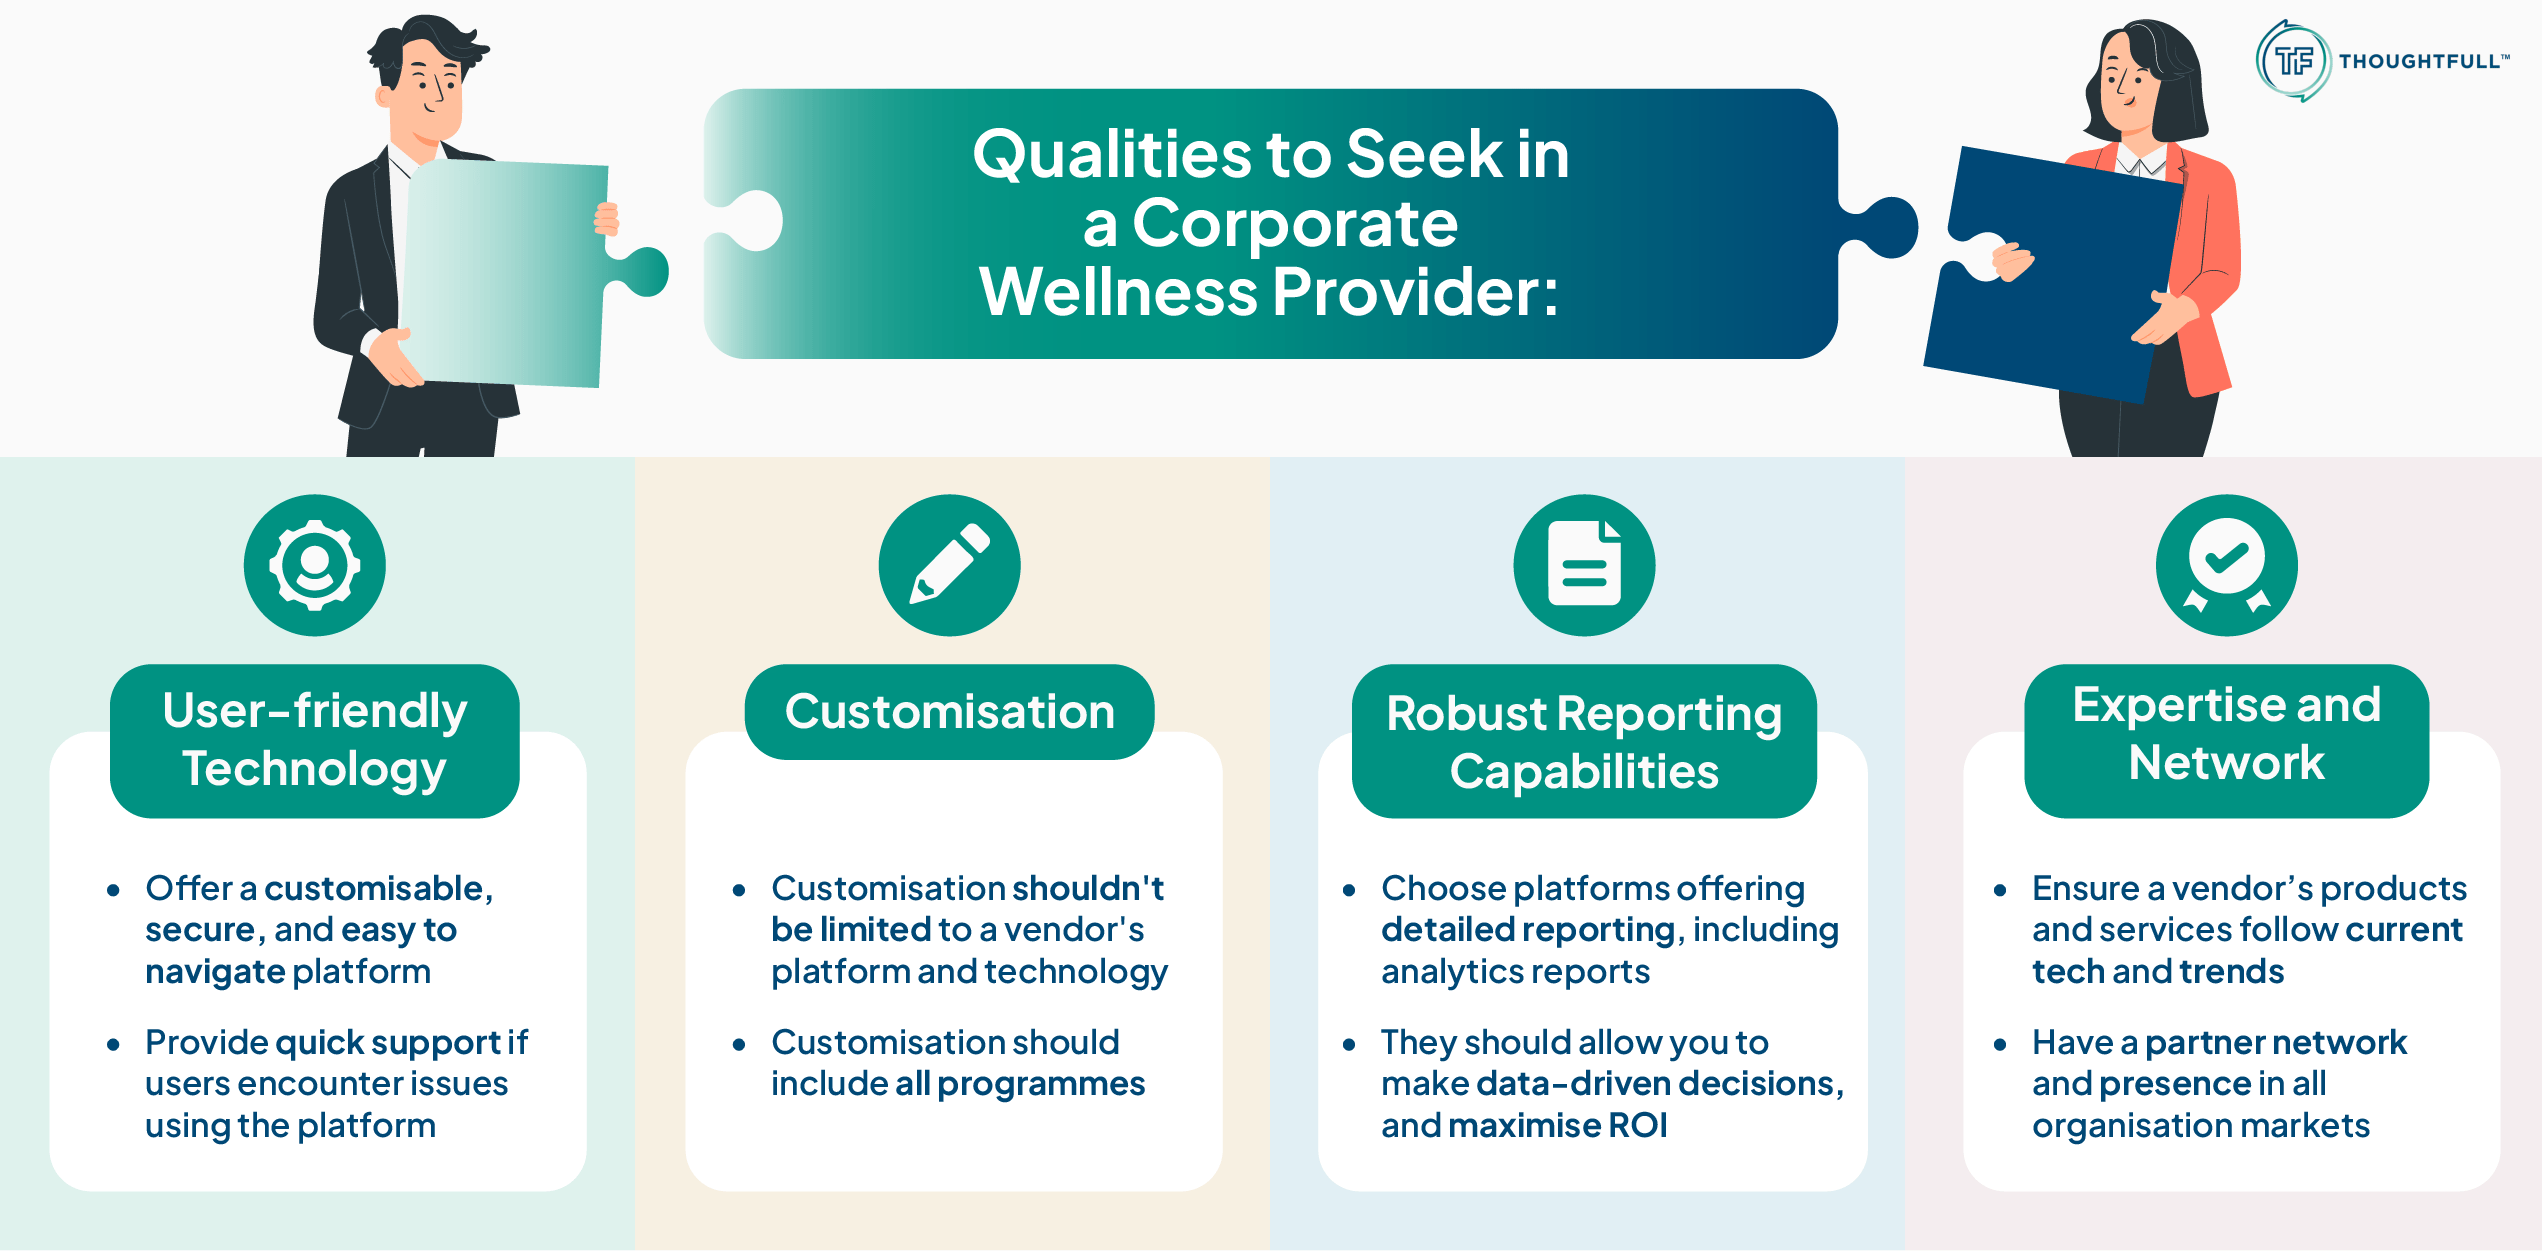 THW-003_What Should Organisations Look for in a Wellness Provider